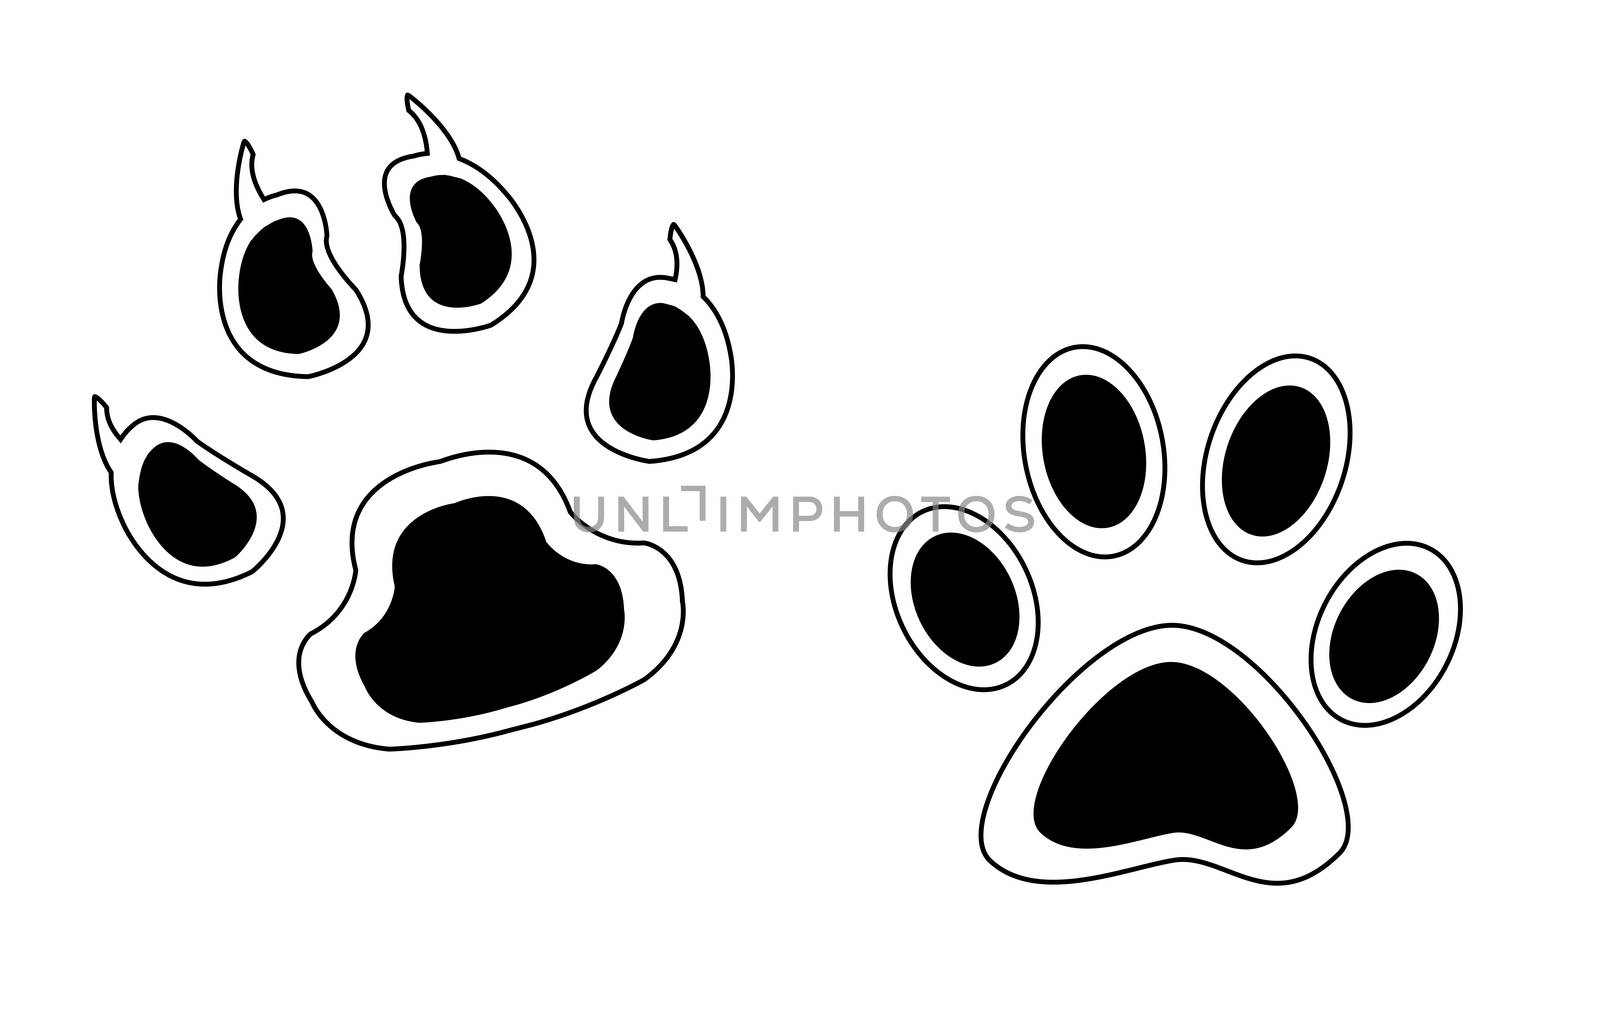 Sketch footprints of animals with claws and without. Isolated on white background